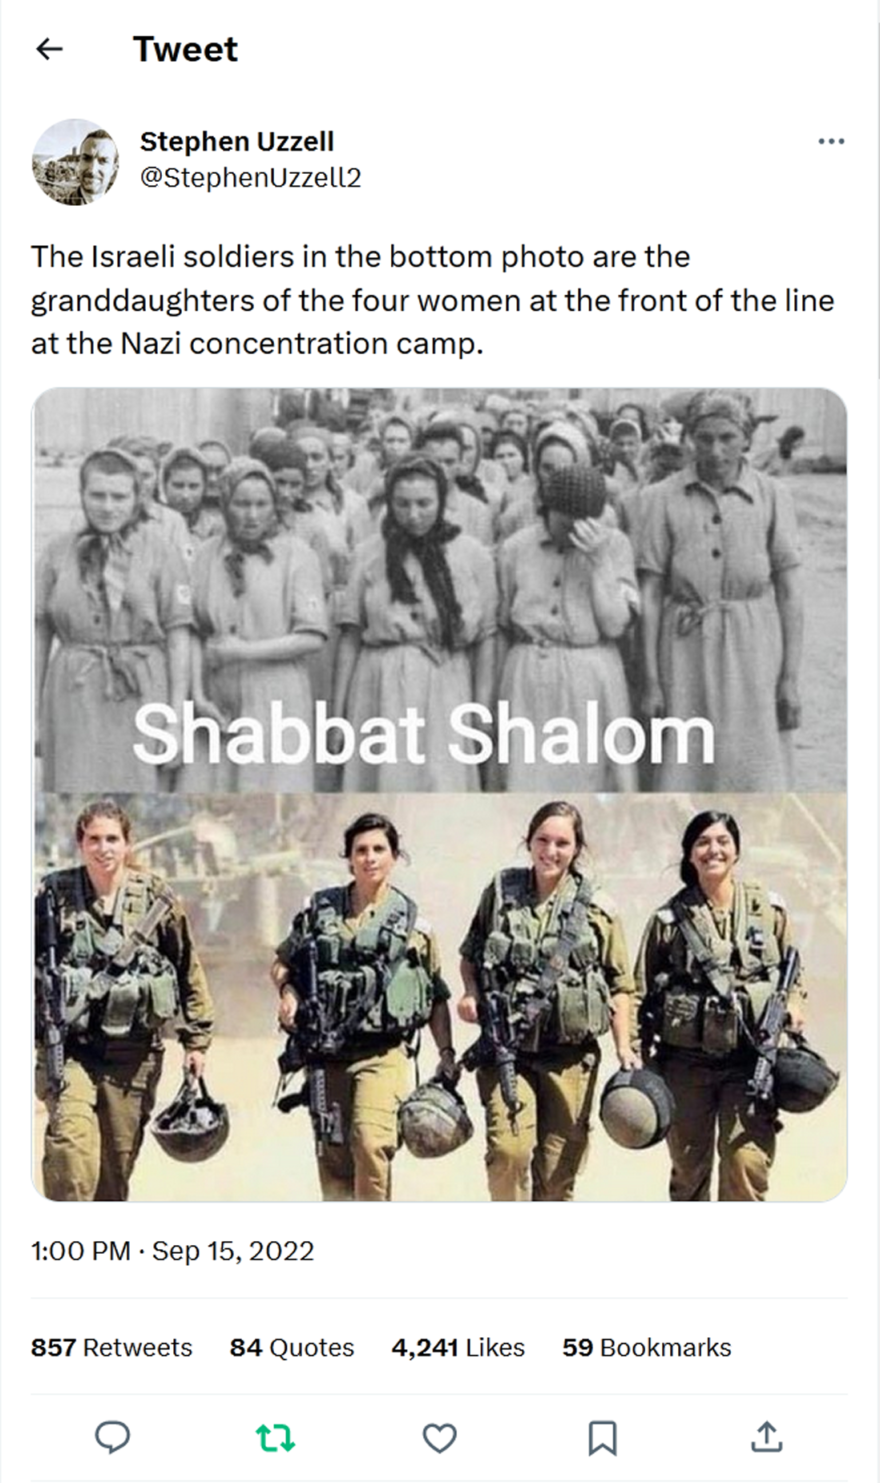 Stephen Uzzell-tweet-15September2022-The Israeli soldiers in the bottom photo are the granddaughters of the four women at the front of the line at the Nazi concentration camp.